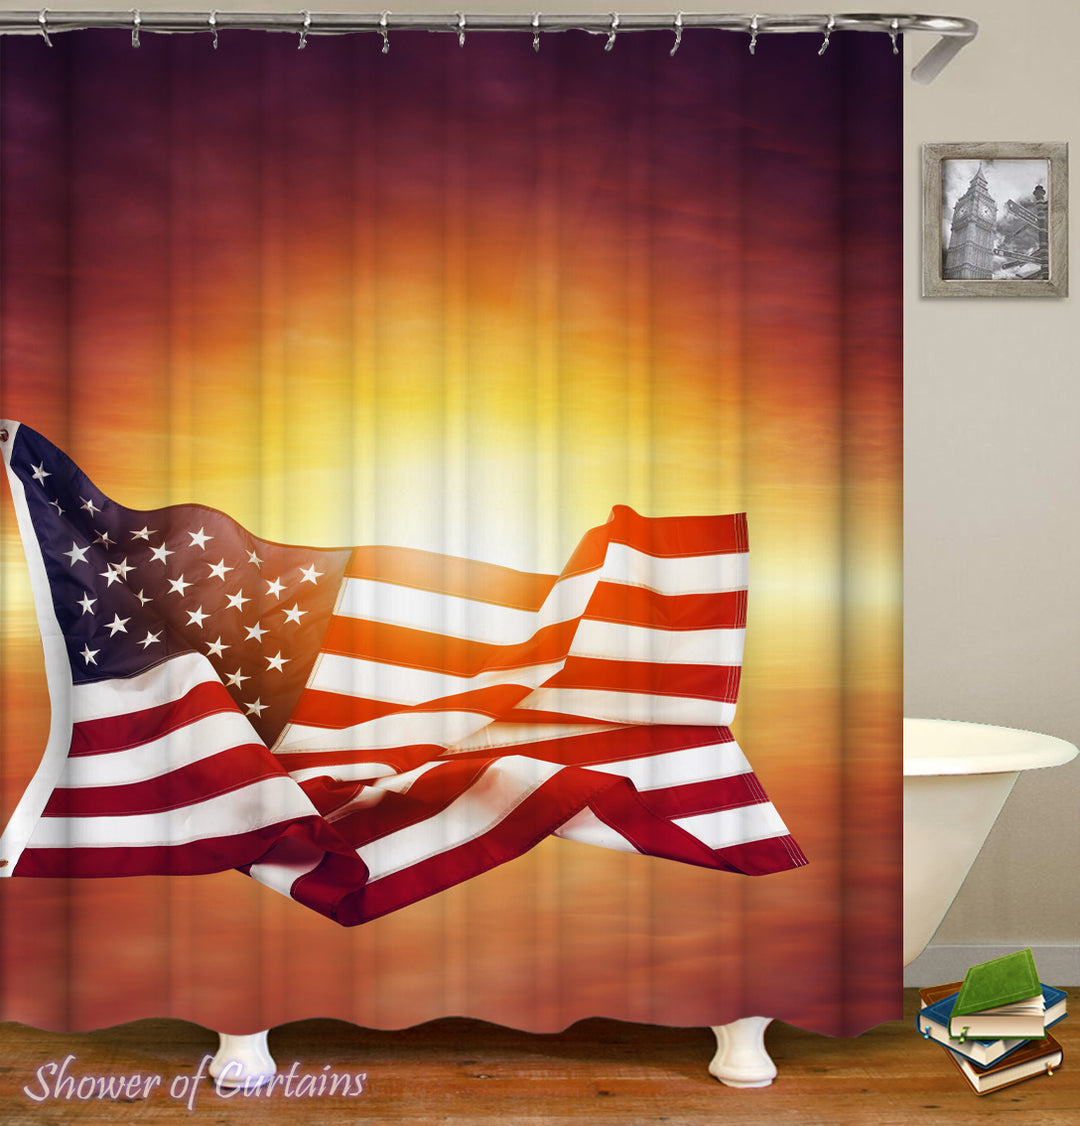 The American Flag Over The Sunset Shower Curtain